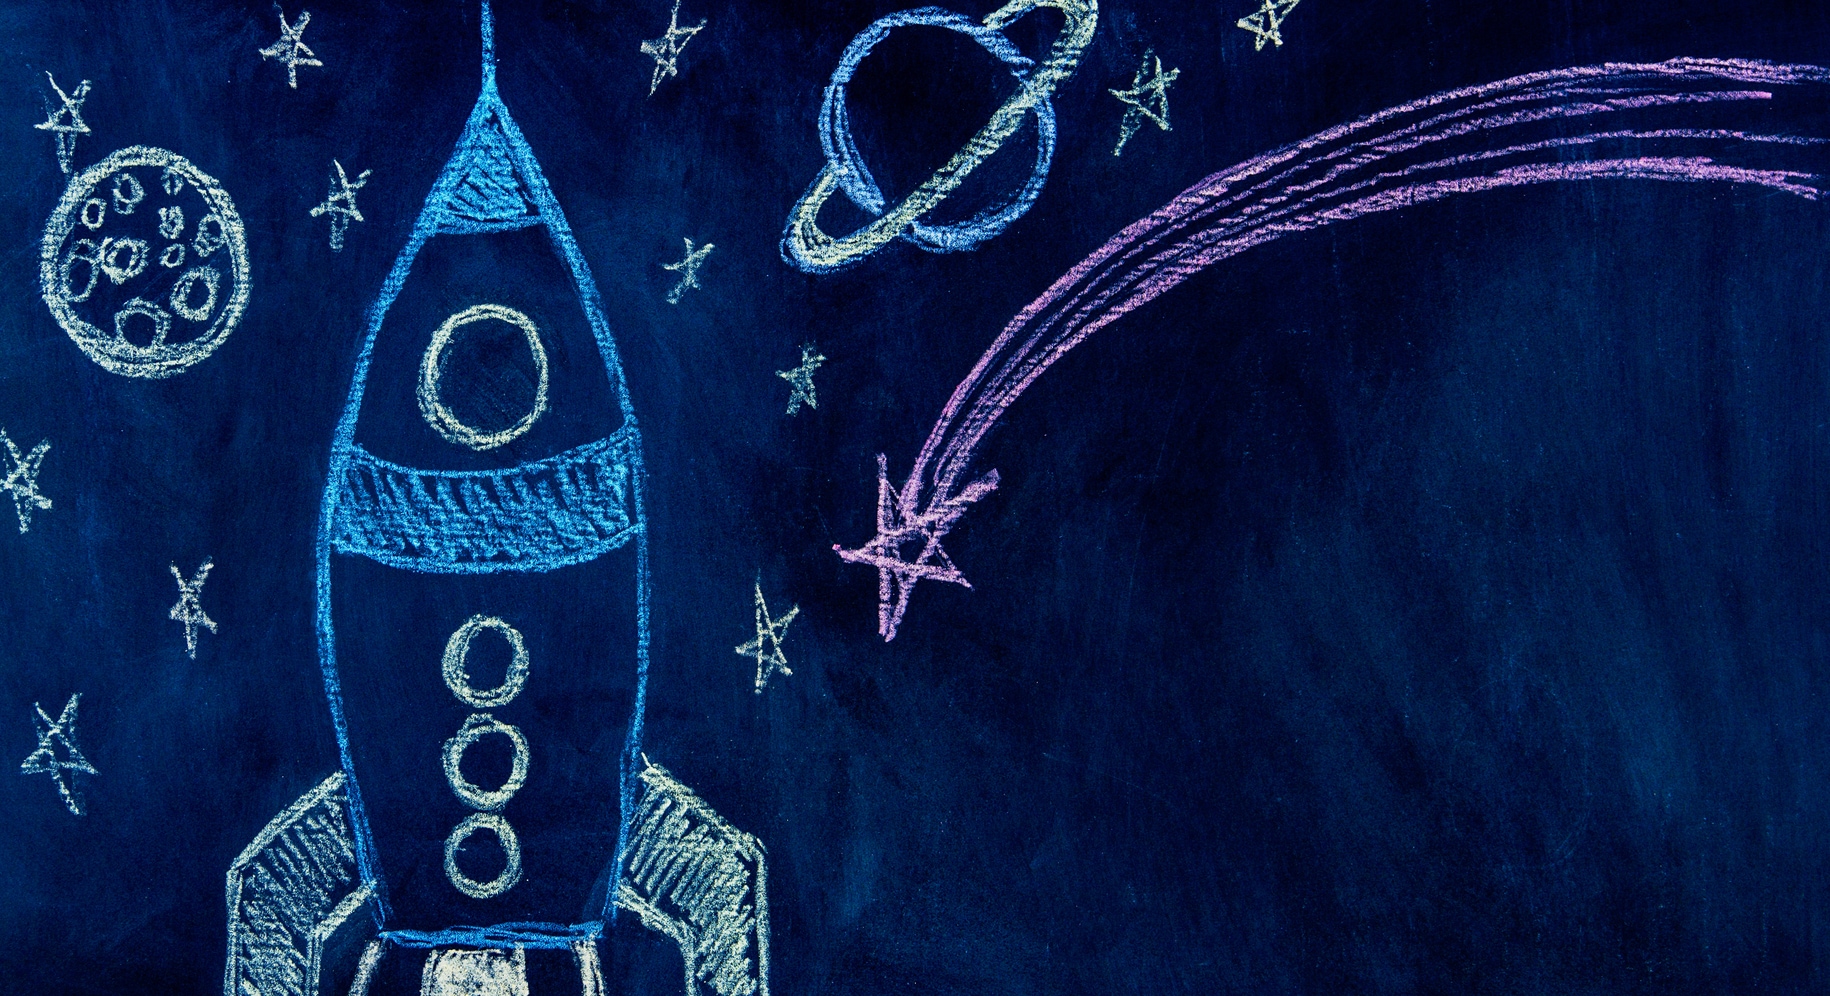 chalk drawing of spaceship and stars